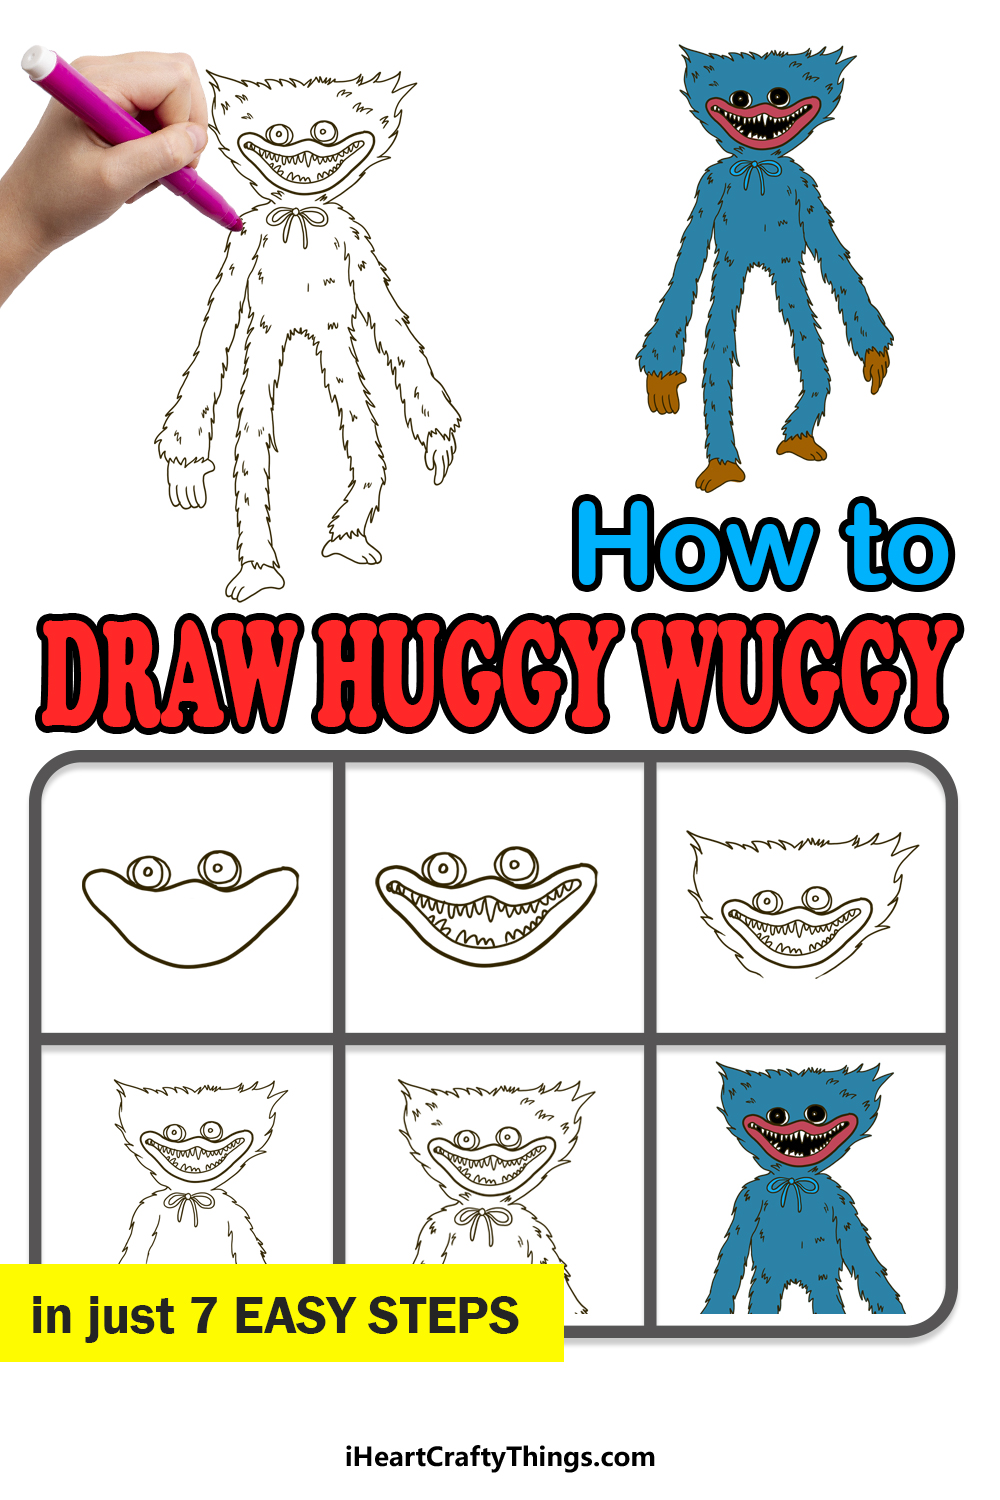 How to Draw Huggy Wuggy step by step guide